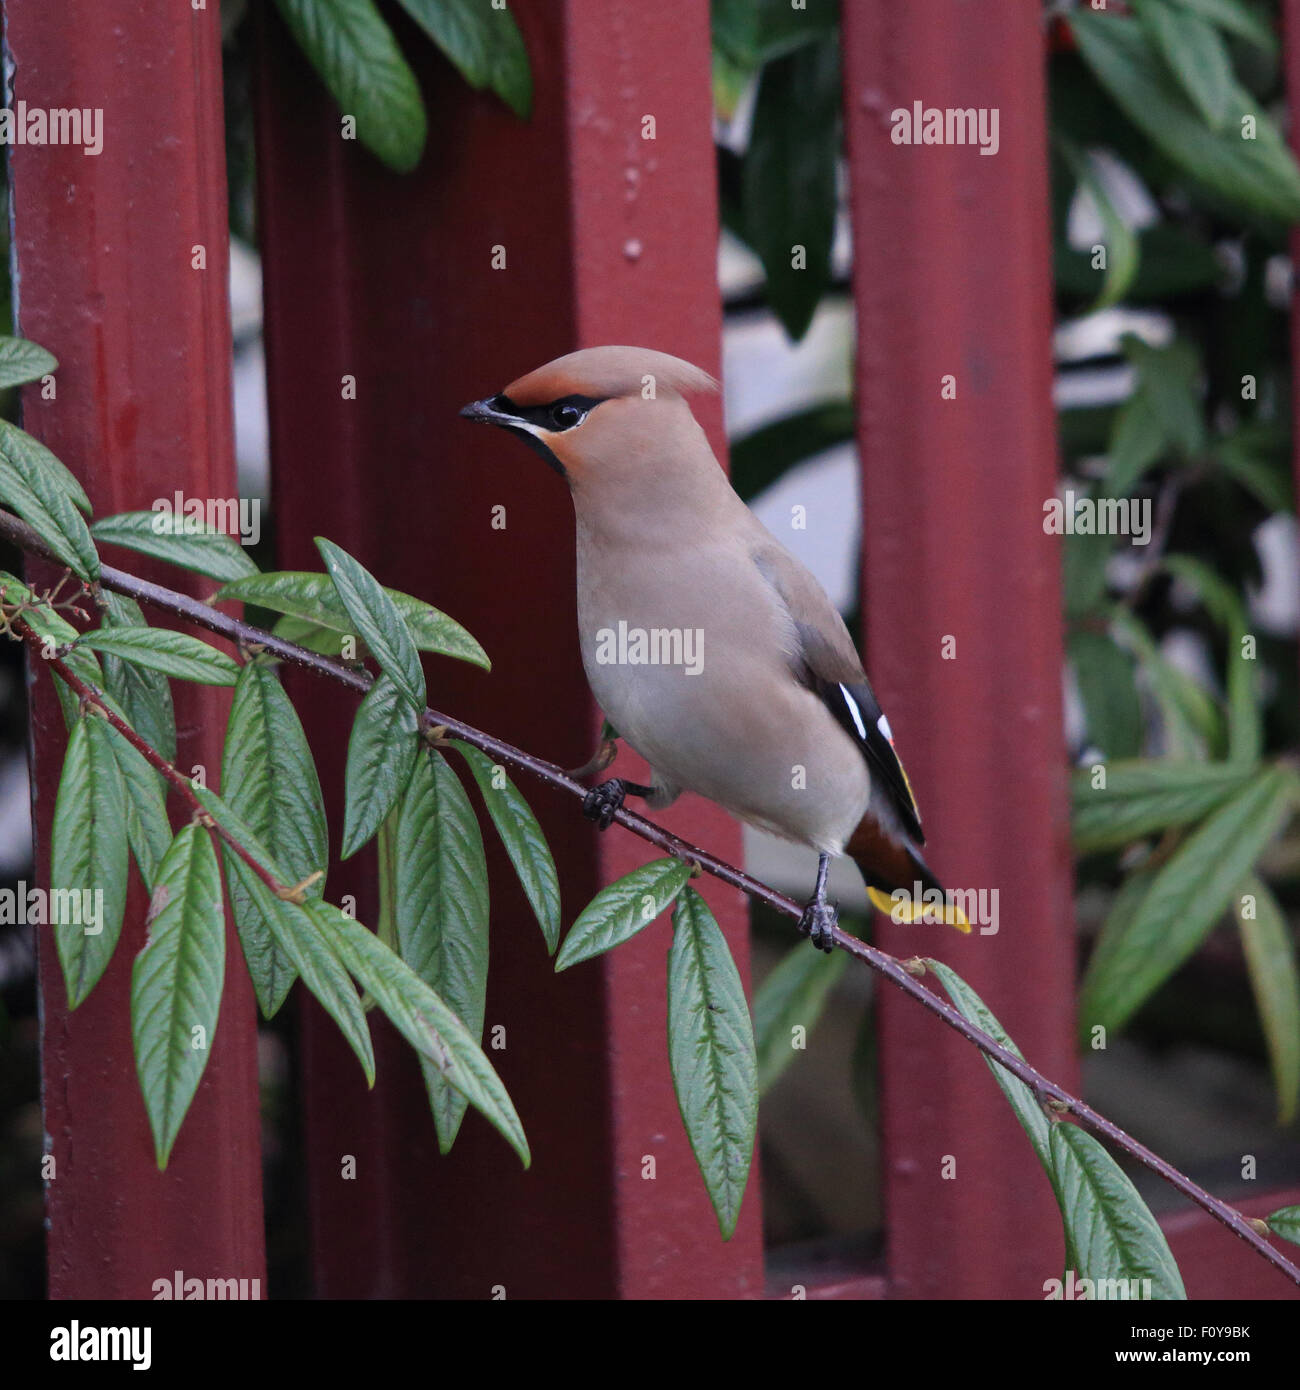 A lovely Bohemian Waxwing, also known simply as Waxwing, perched on a branch in front of a red fence Stock Photo